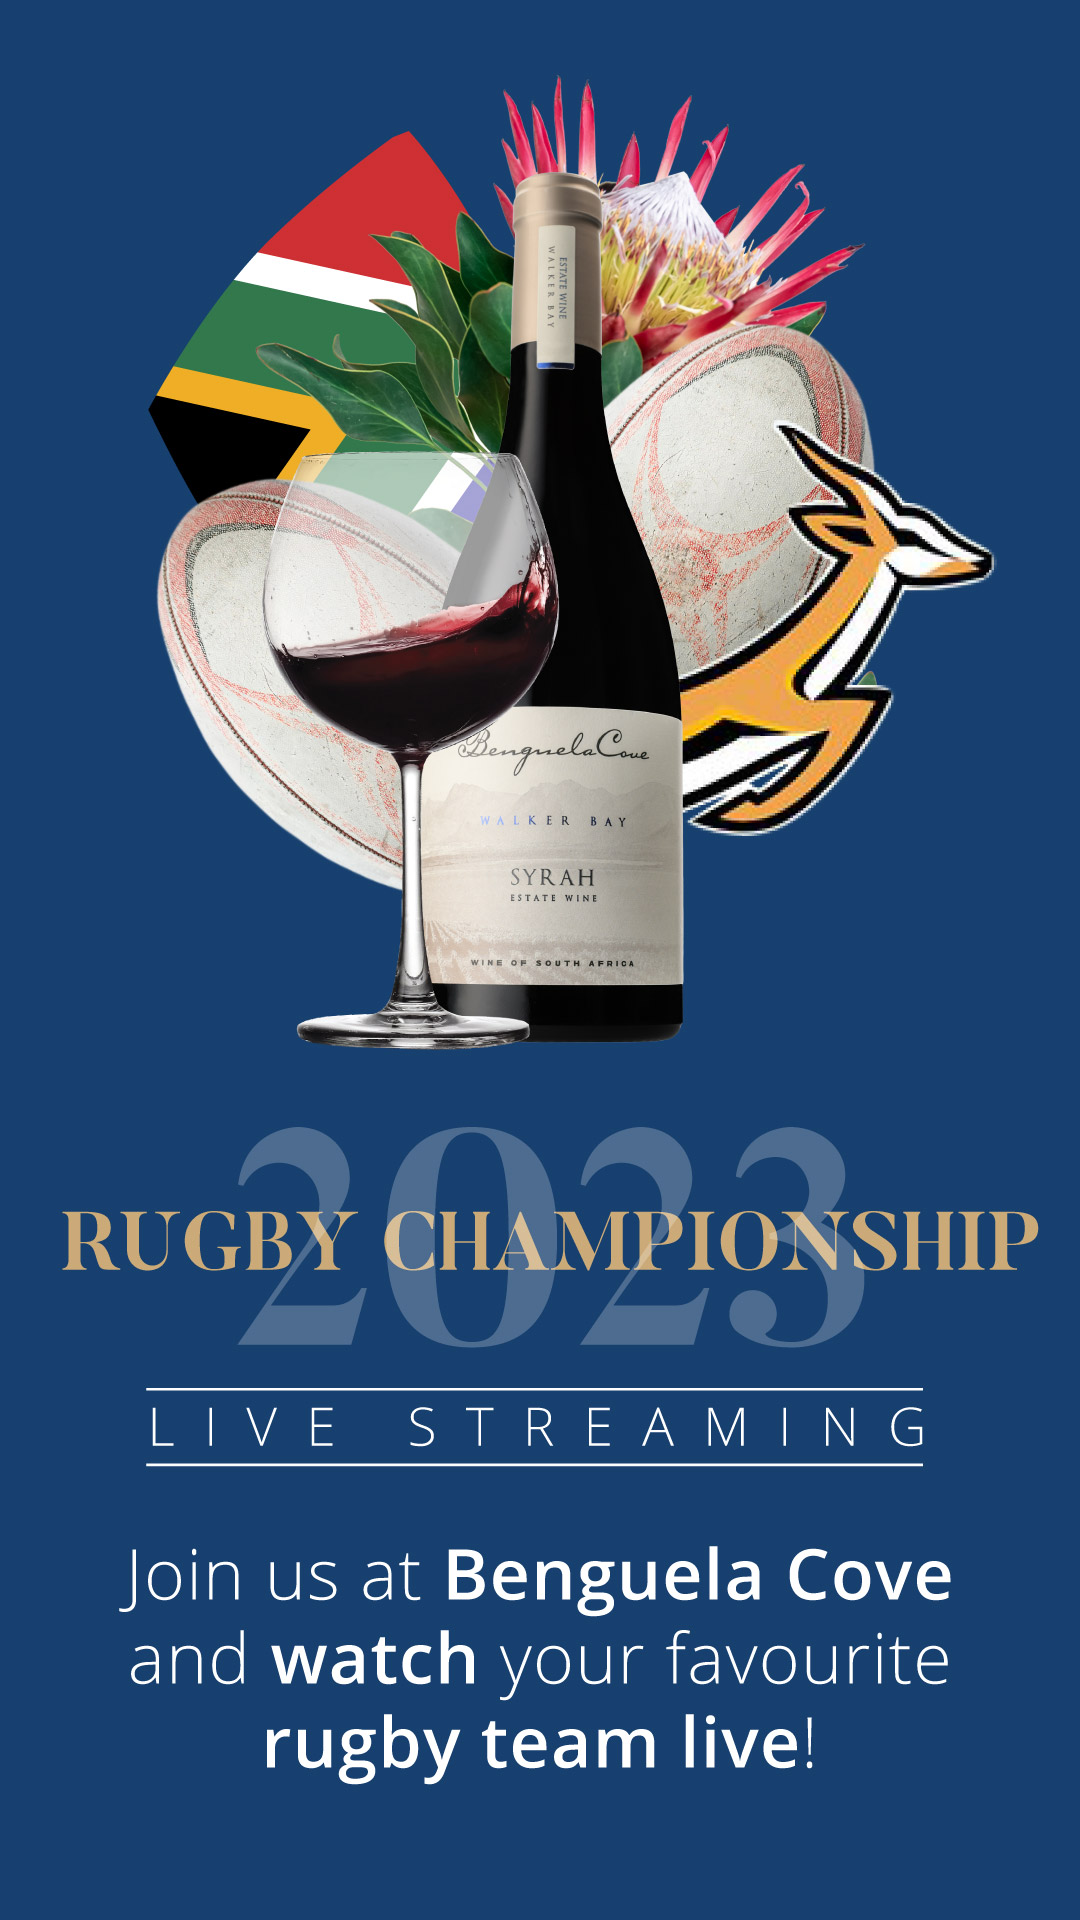 Benguela Cove Rugby Championship 2023 Live Streaming photo